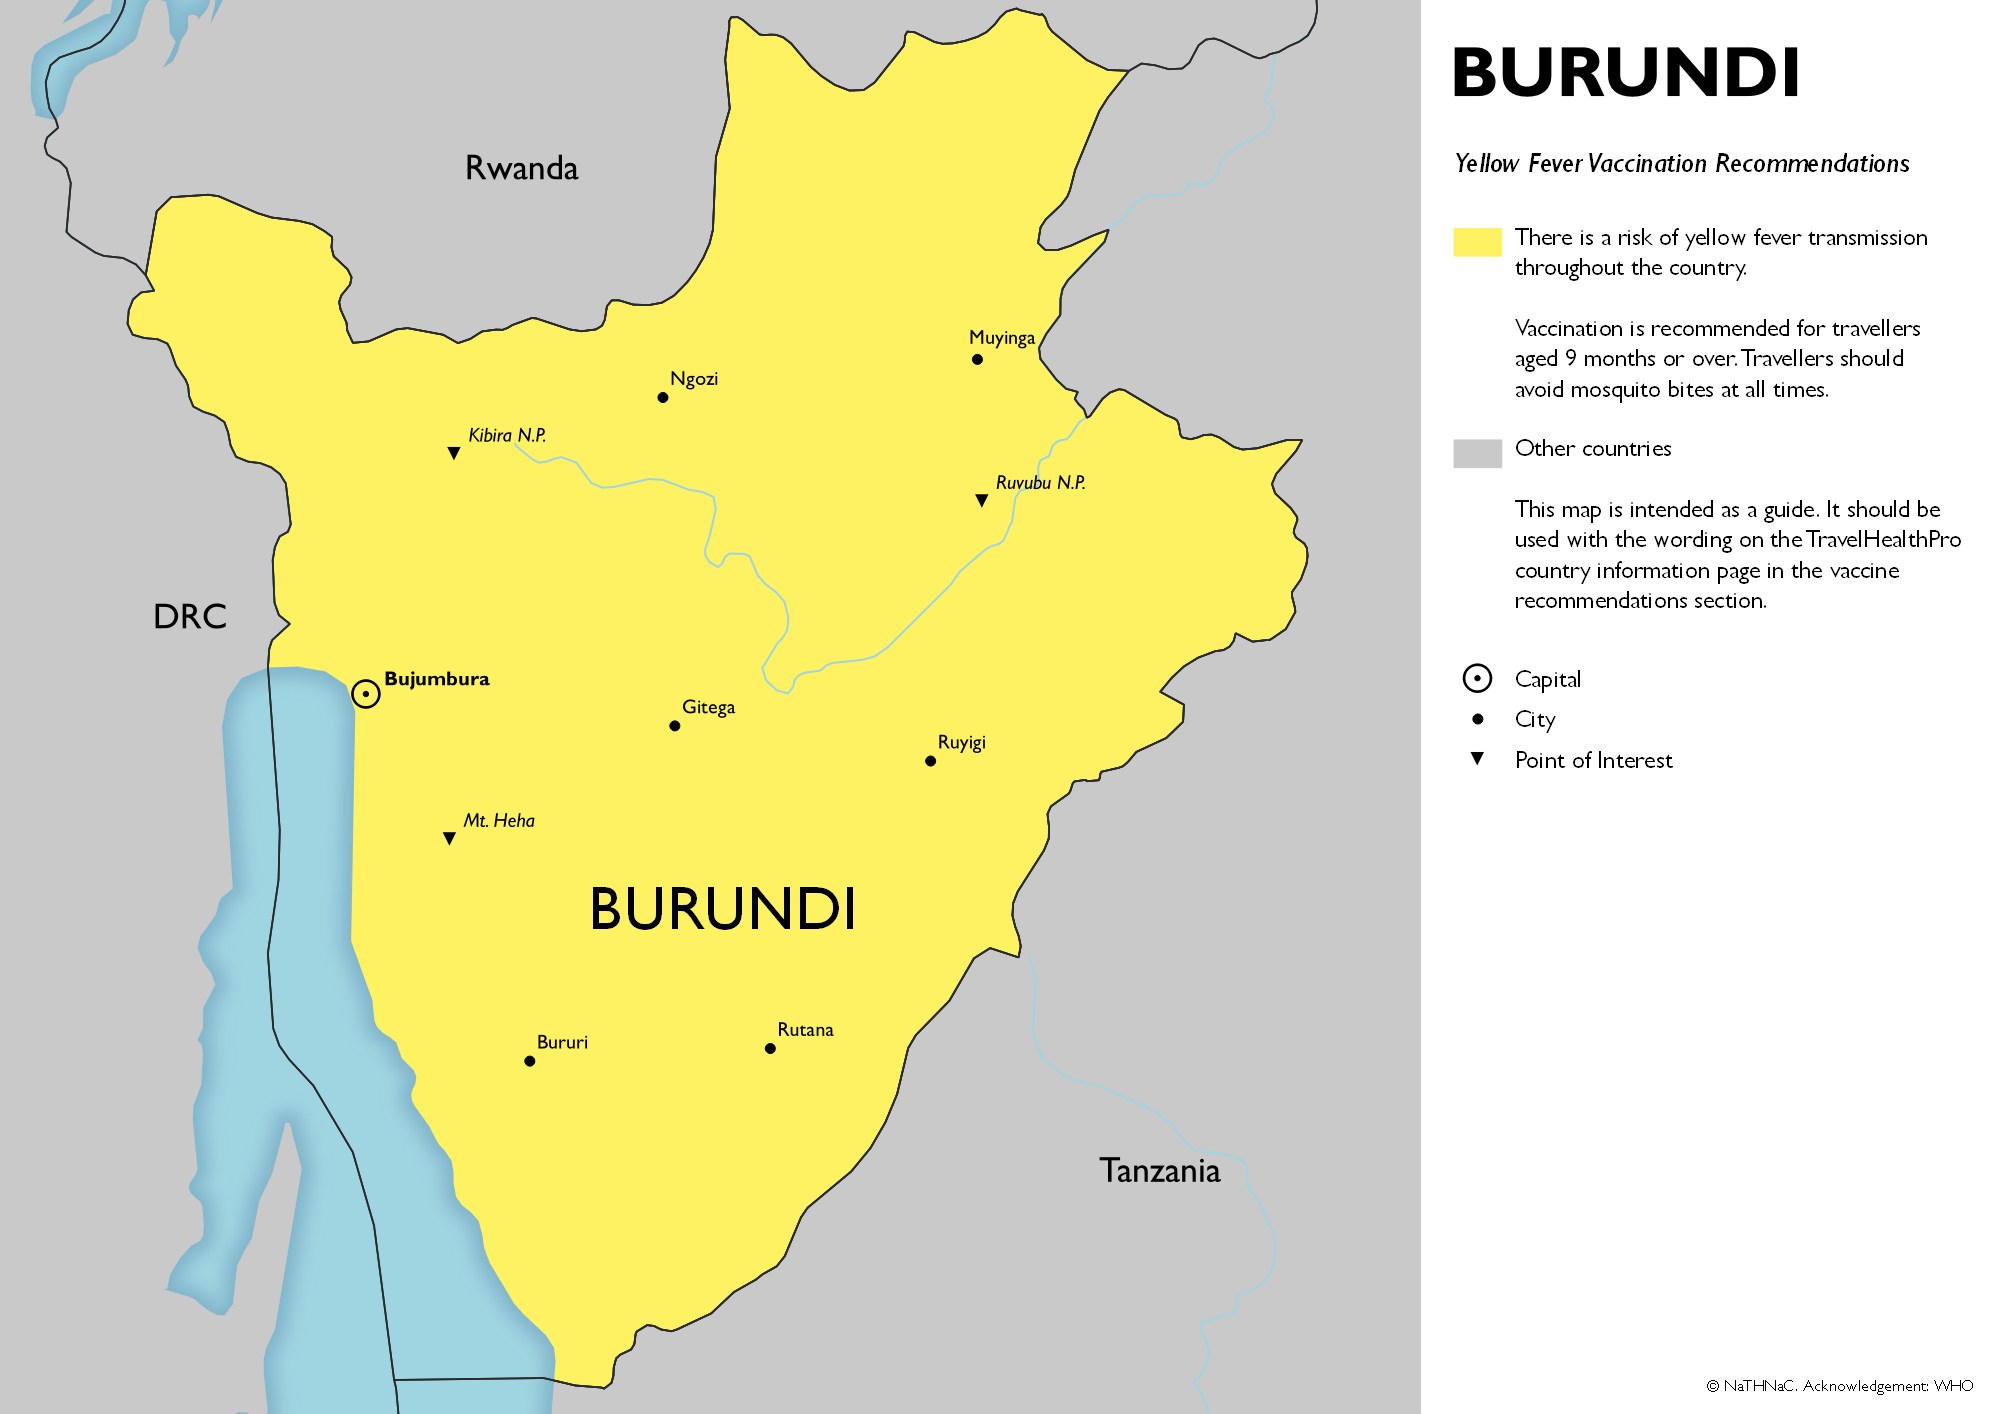 Yellow fever vaccine recommendation map for Burundi